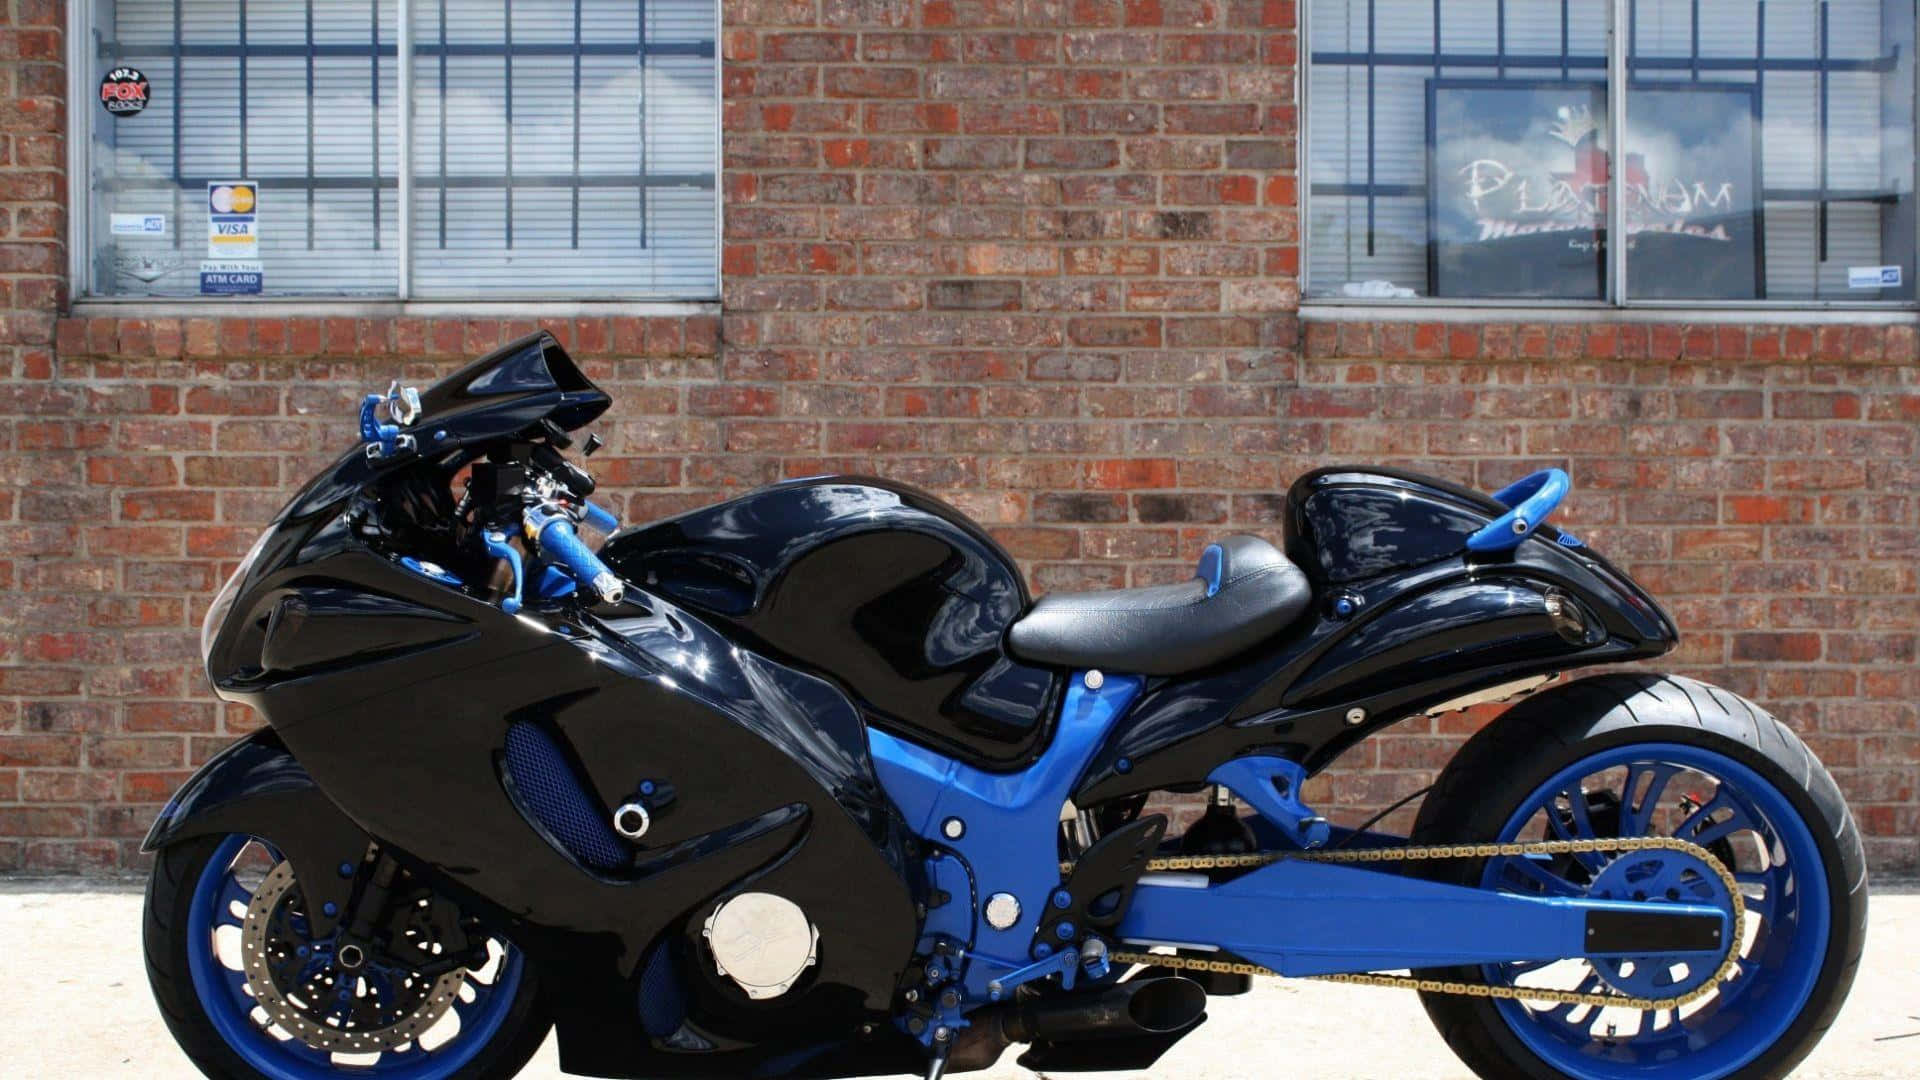 A Motorcycle Parked In Front Of A Brick Building